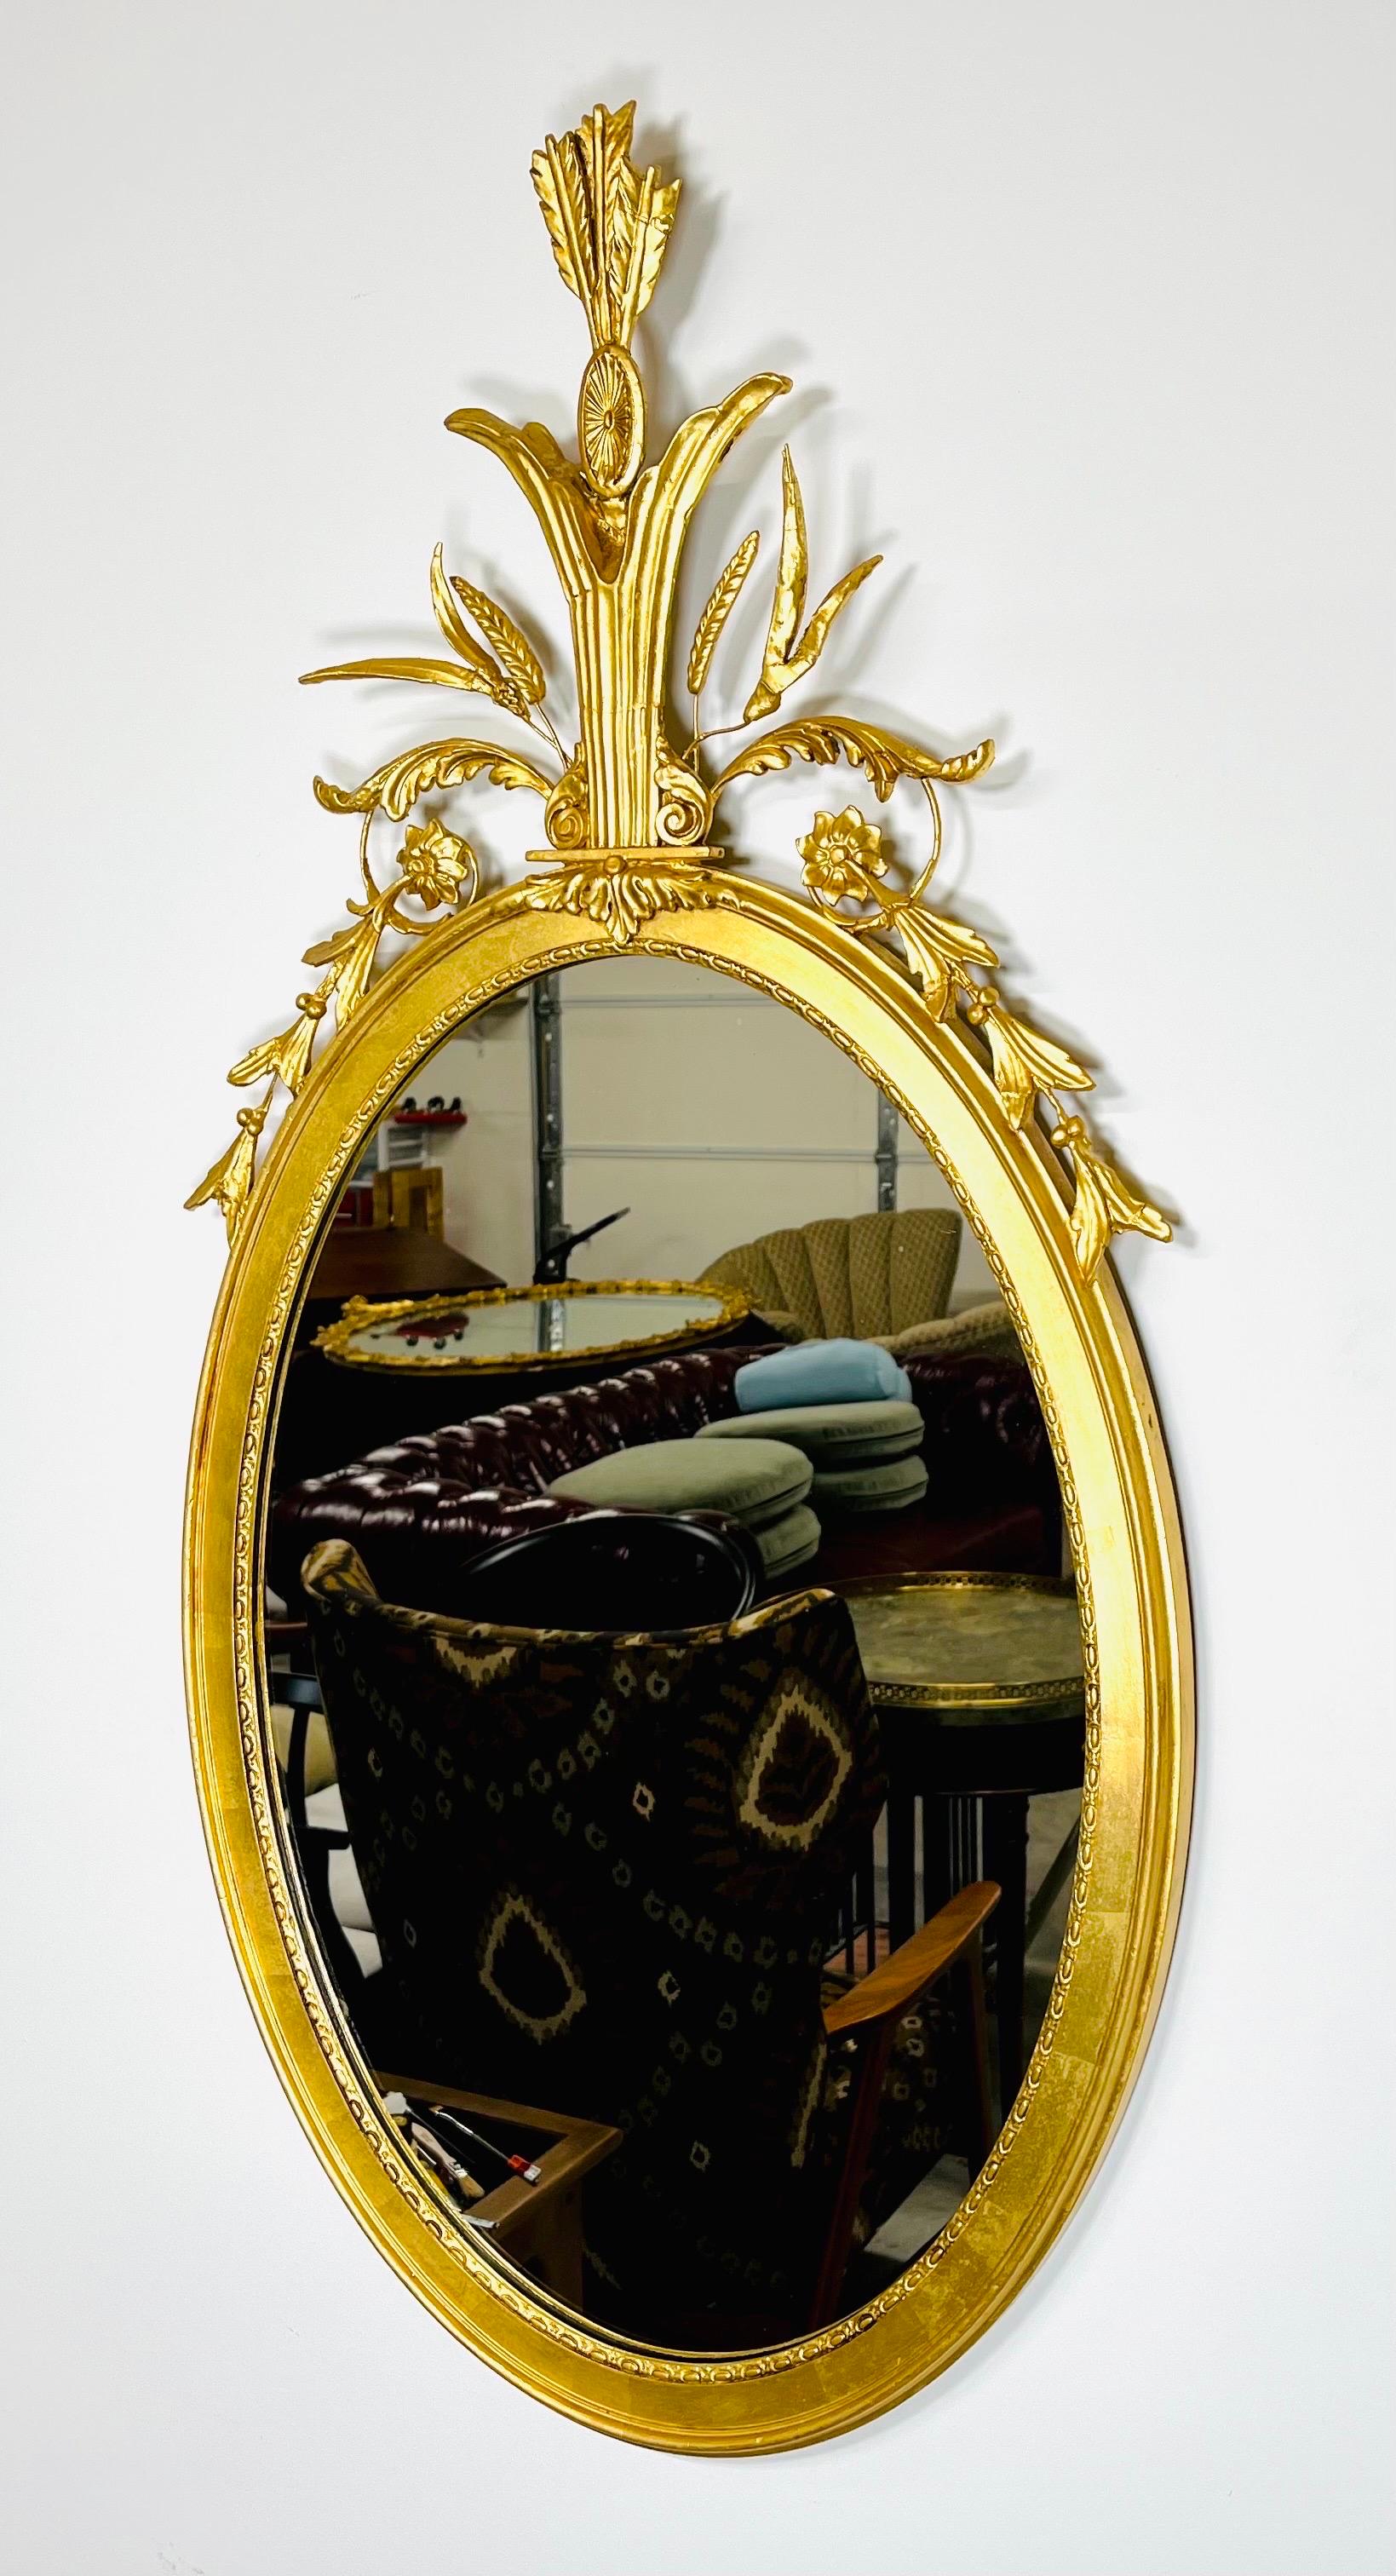 A beautiful Adam’s style mirror adorned with gold gilt wheat sheaf carvings topped with quiver and arrows attributed to Friedman Brothers circa 1940. 
 In outstanding vintage condition having clean, bright gold guilt throughout with a clean mirror